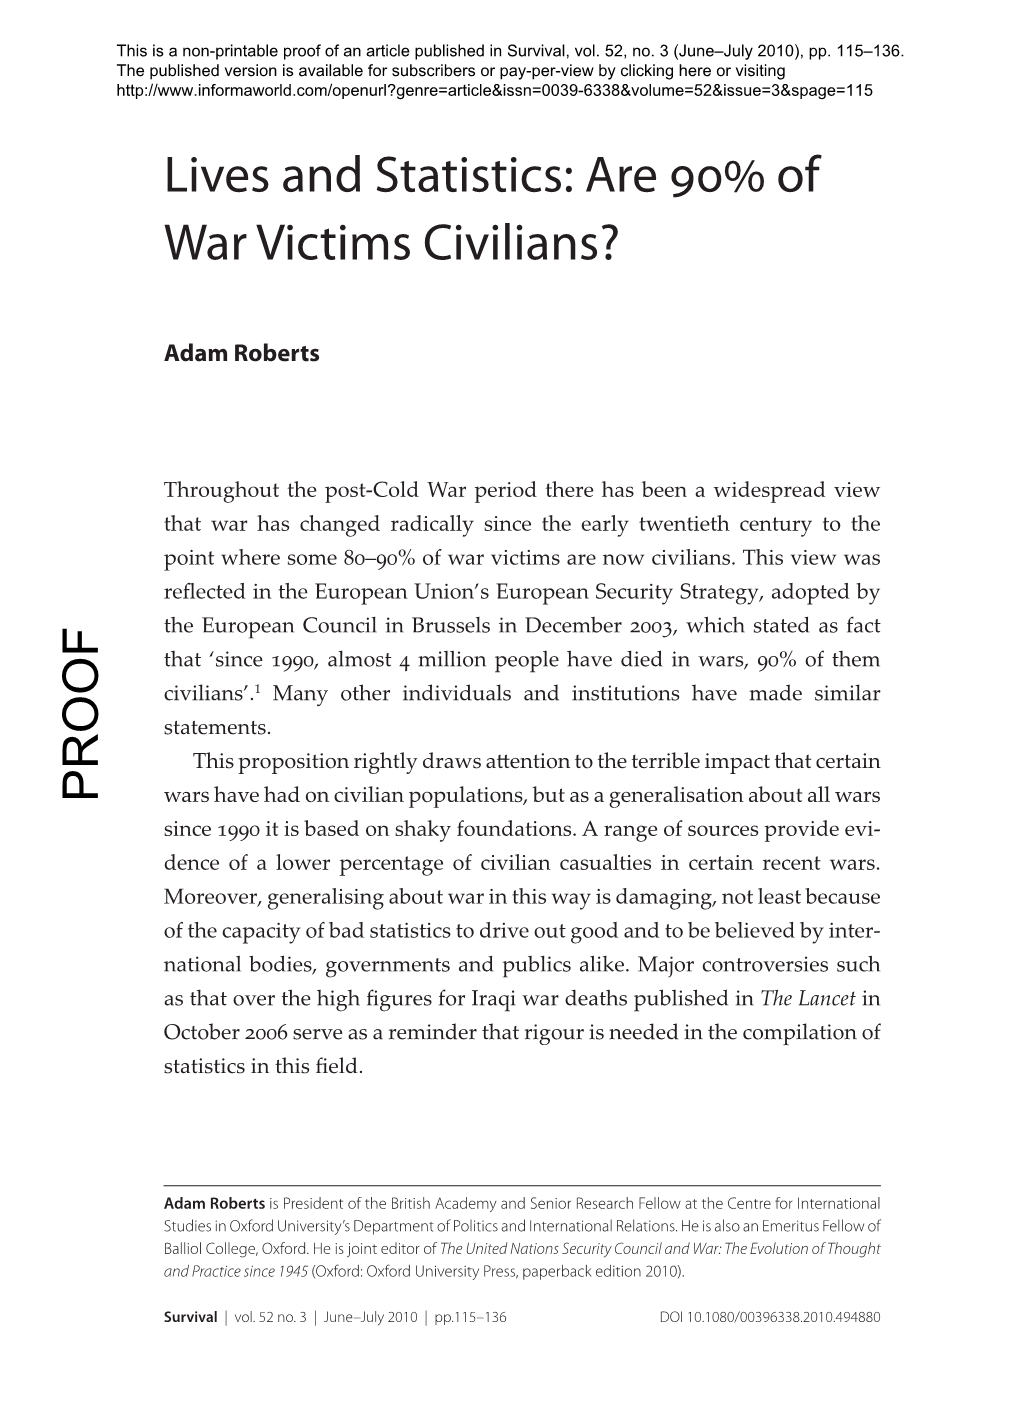 Lives and Statistics: Are 90% of War Victims Civilians?